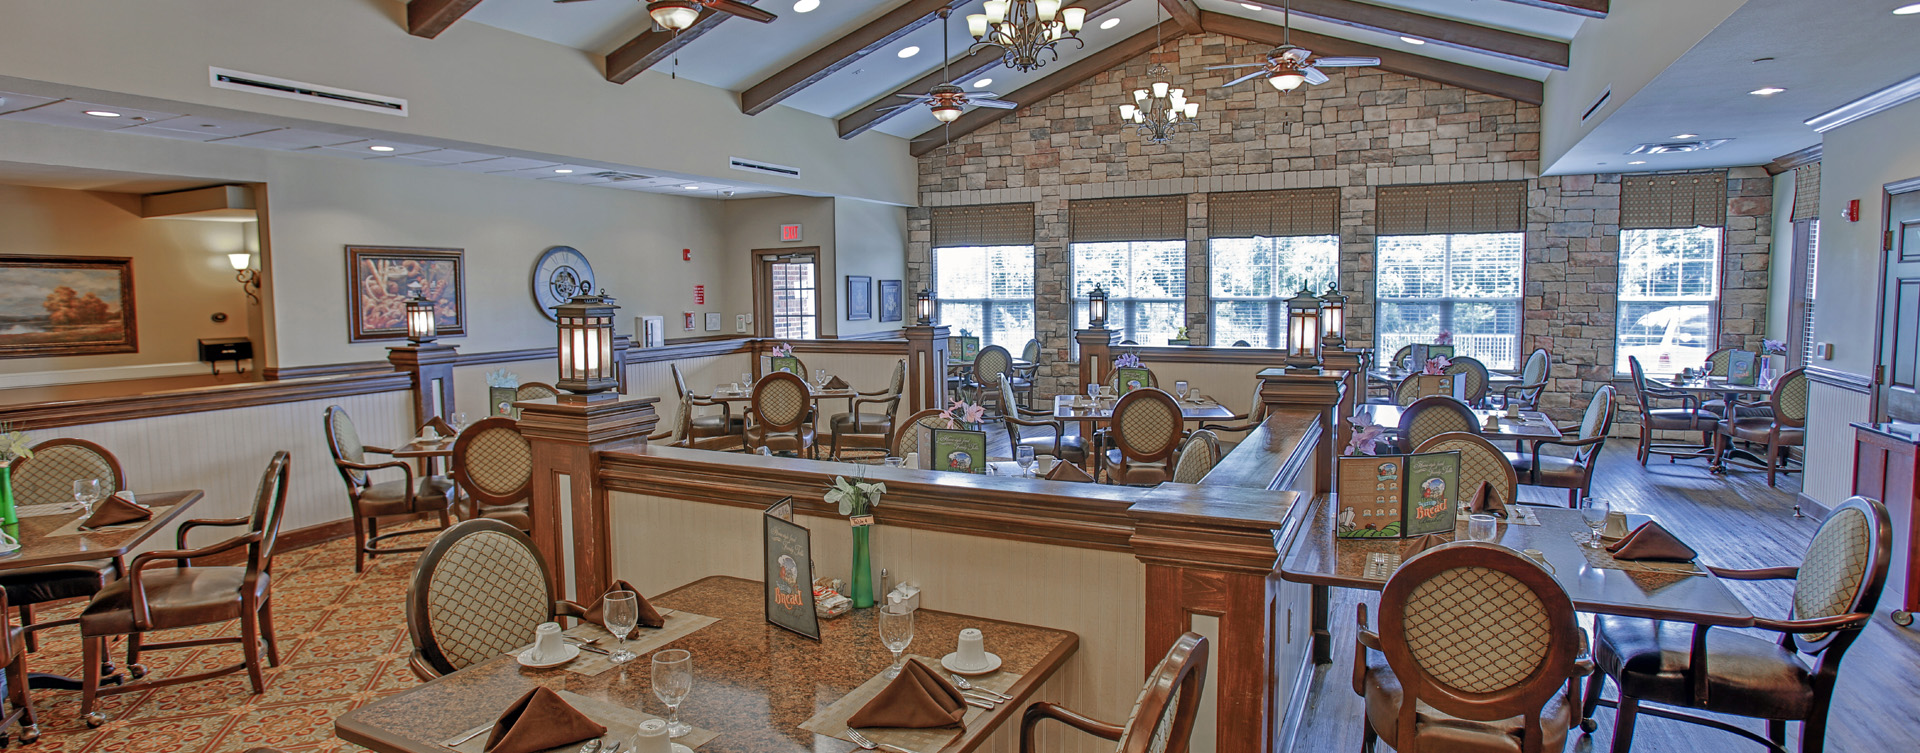 Enjoy restaurant -style meals served three times a day in our dining room at Bickford of Greenwood